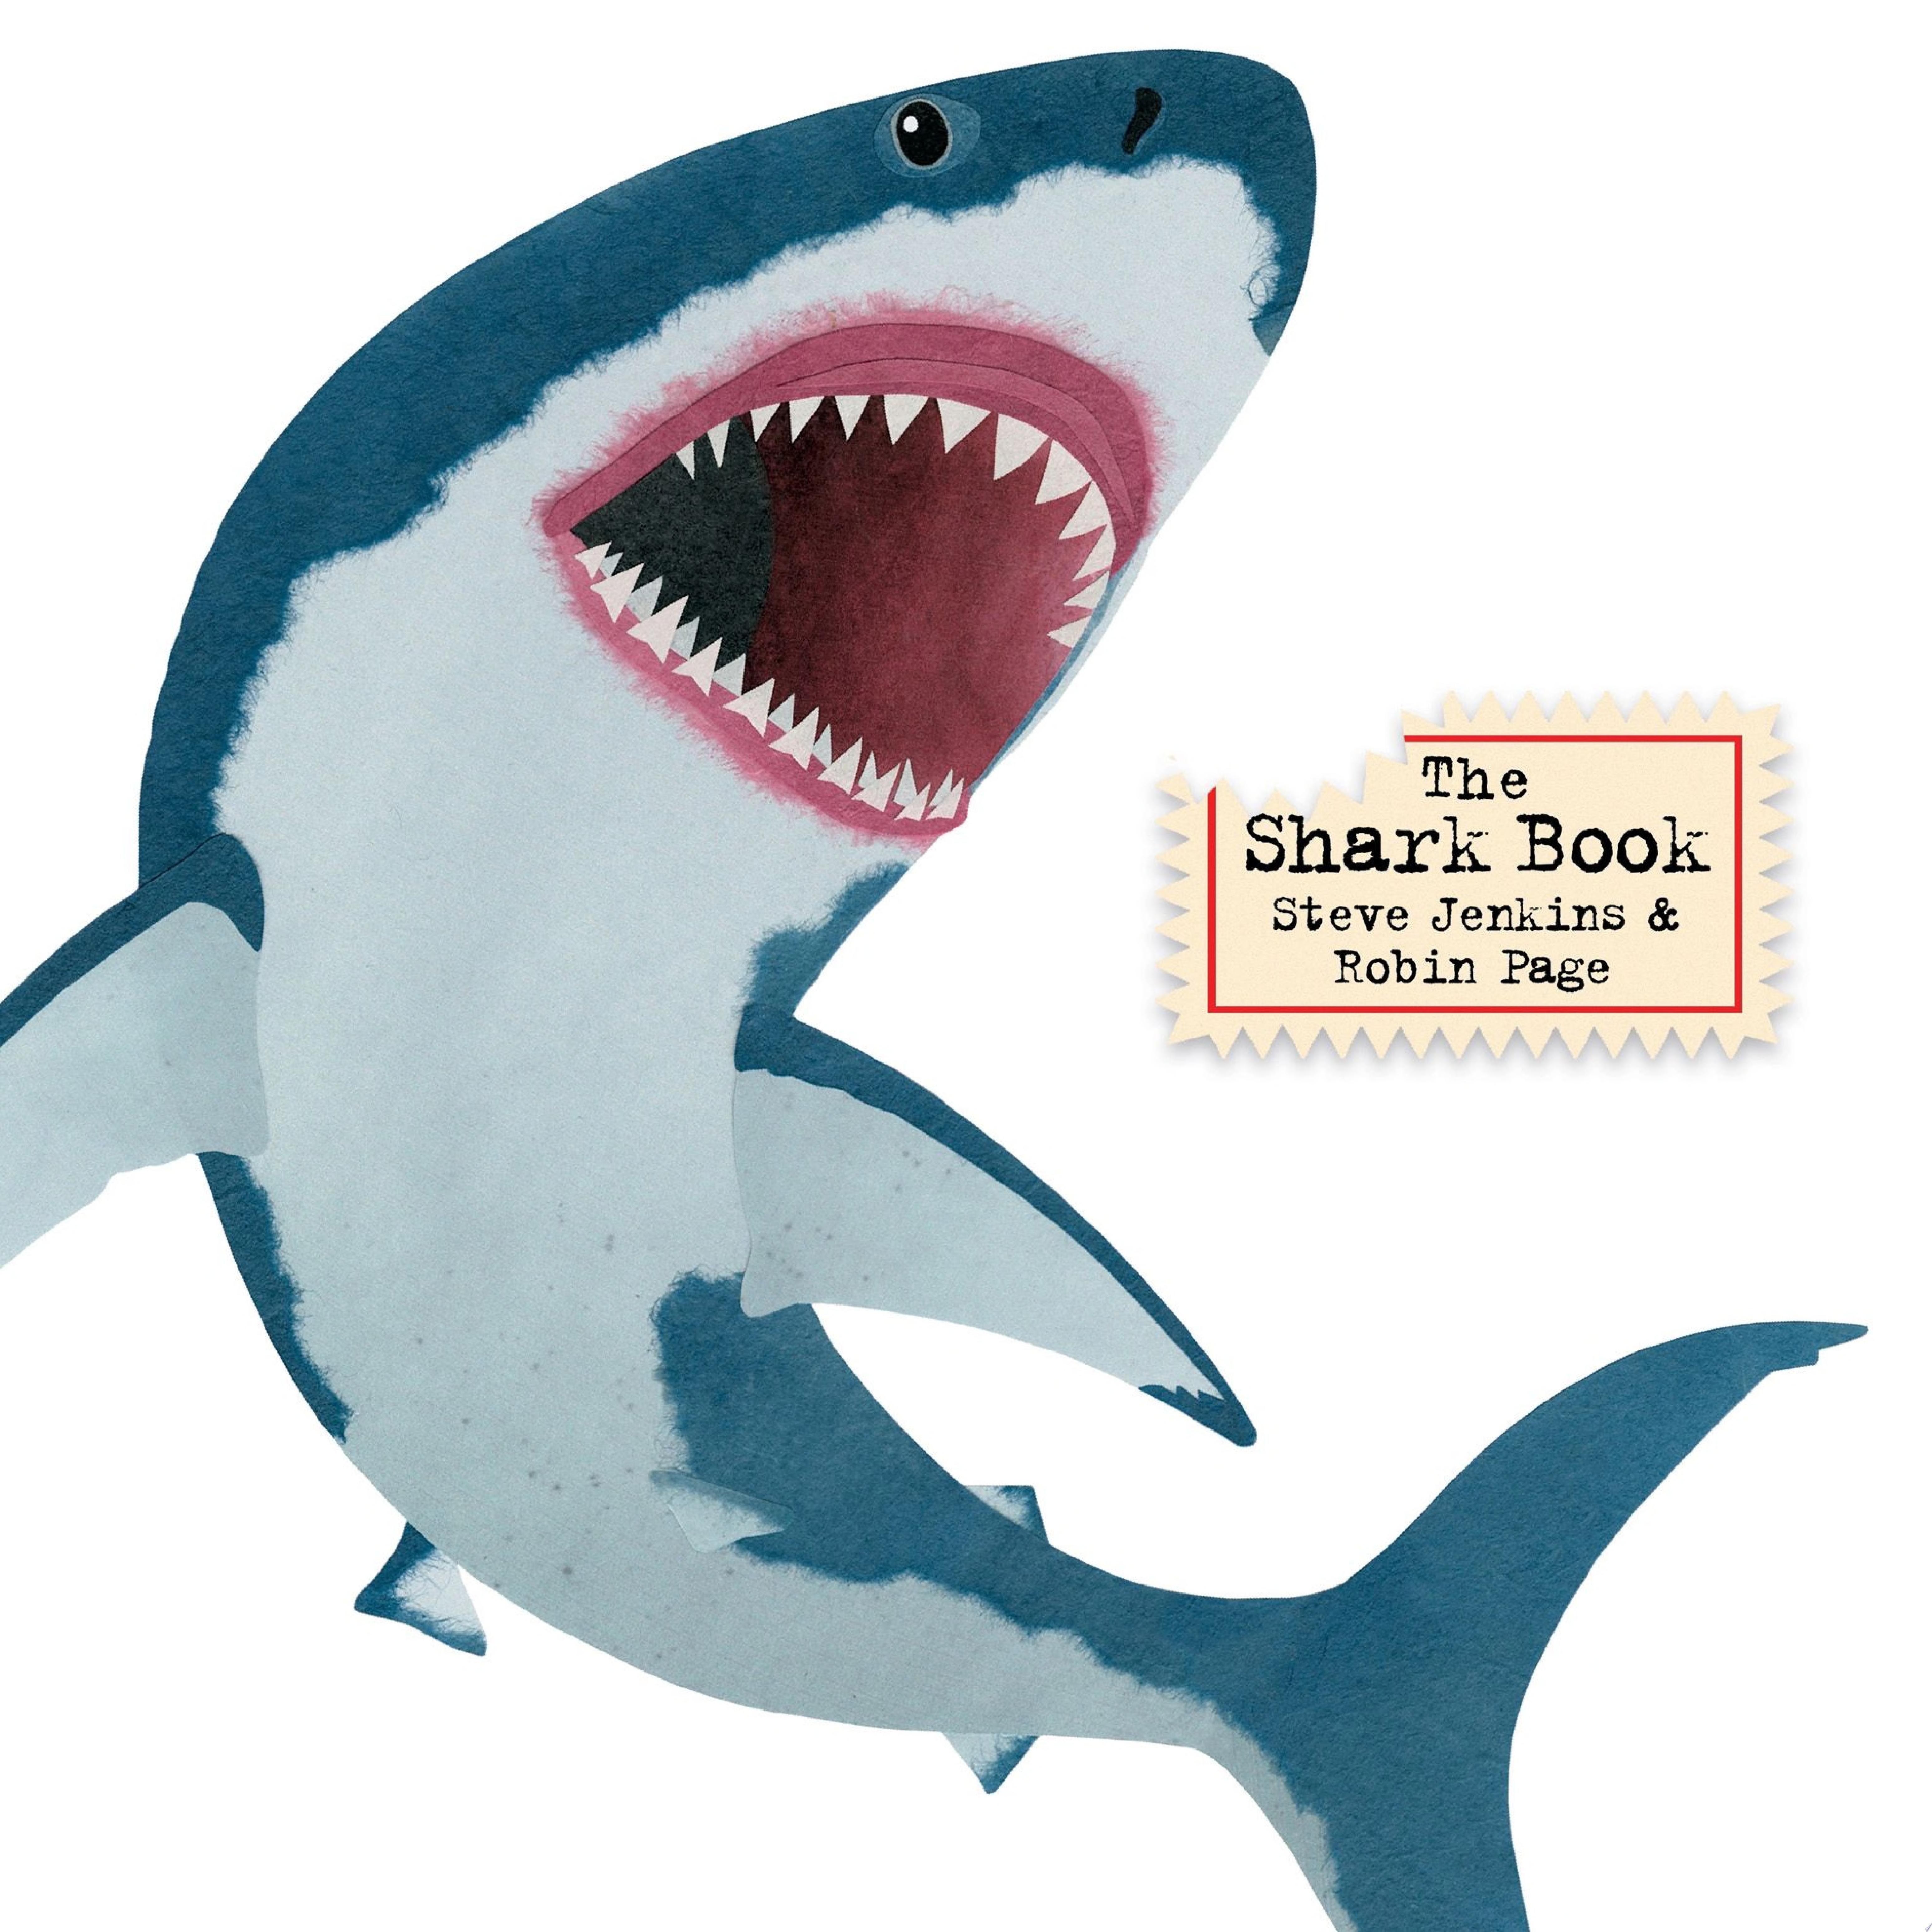 Image for "The Shark Book"